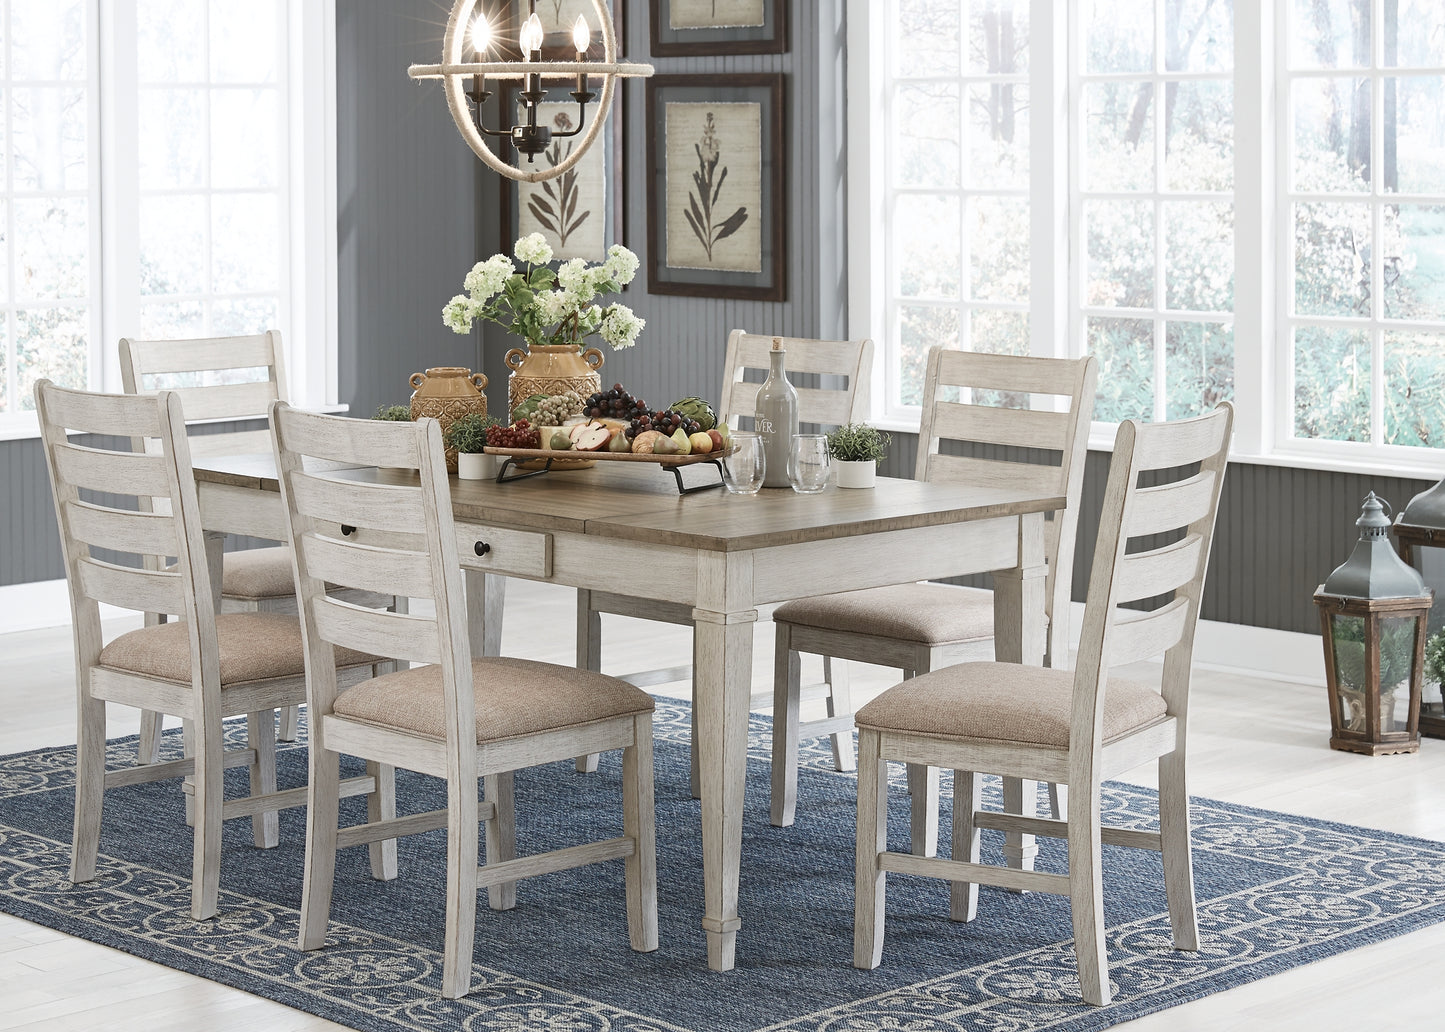 Skempton Dining Table and 6 Chairs